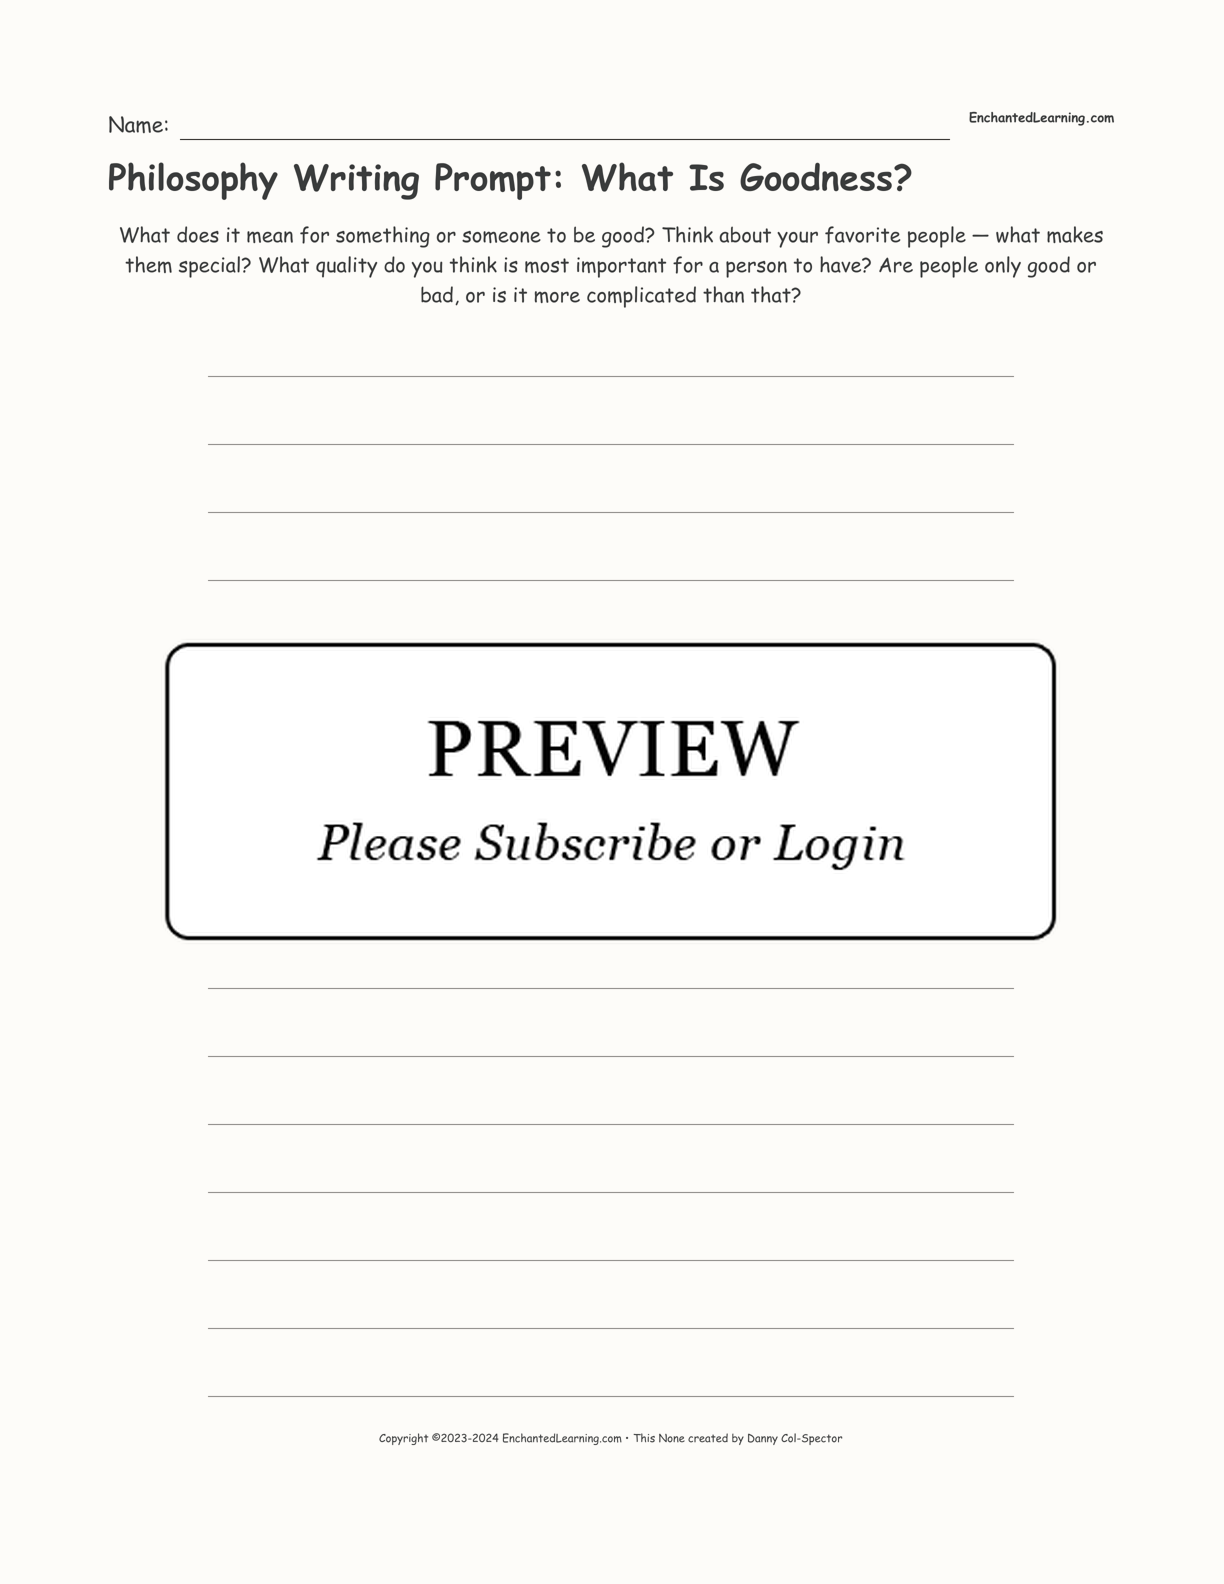 Philosophy Writing Prompt: What Makes A Person Good? interactive printout page 1